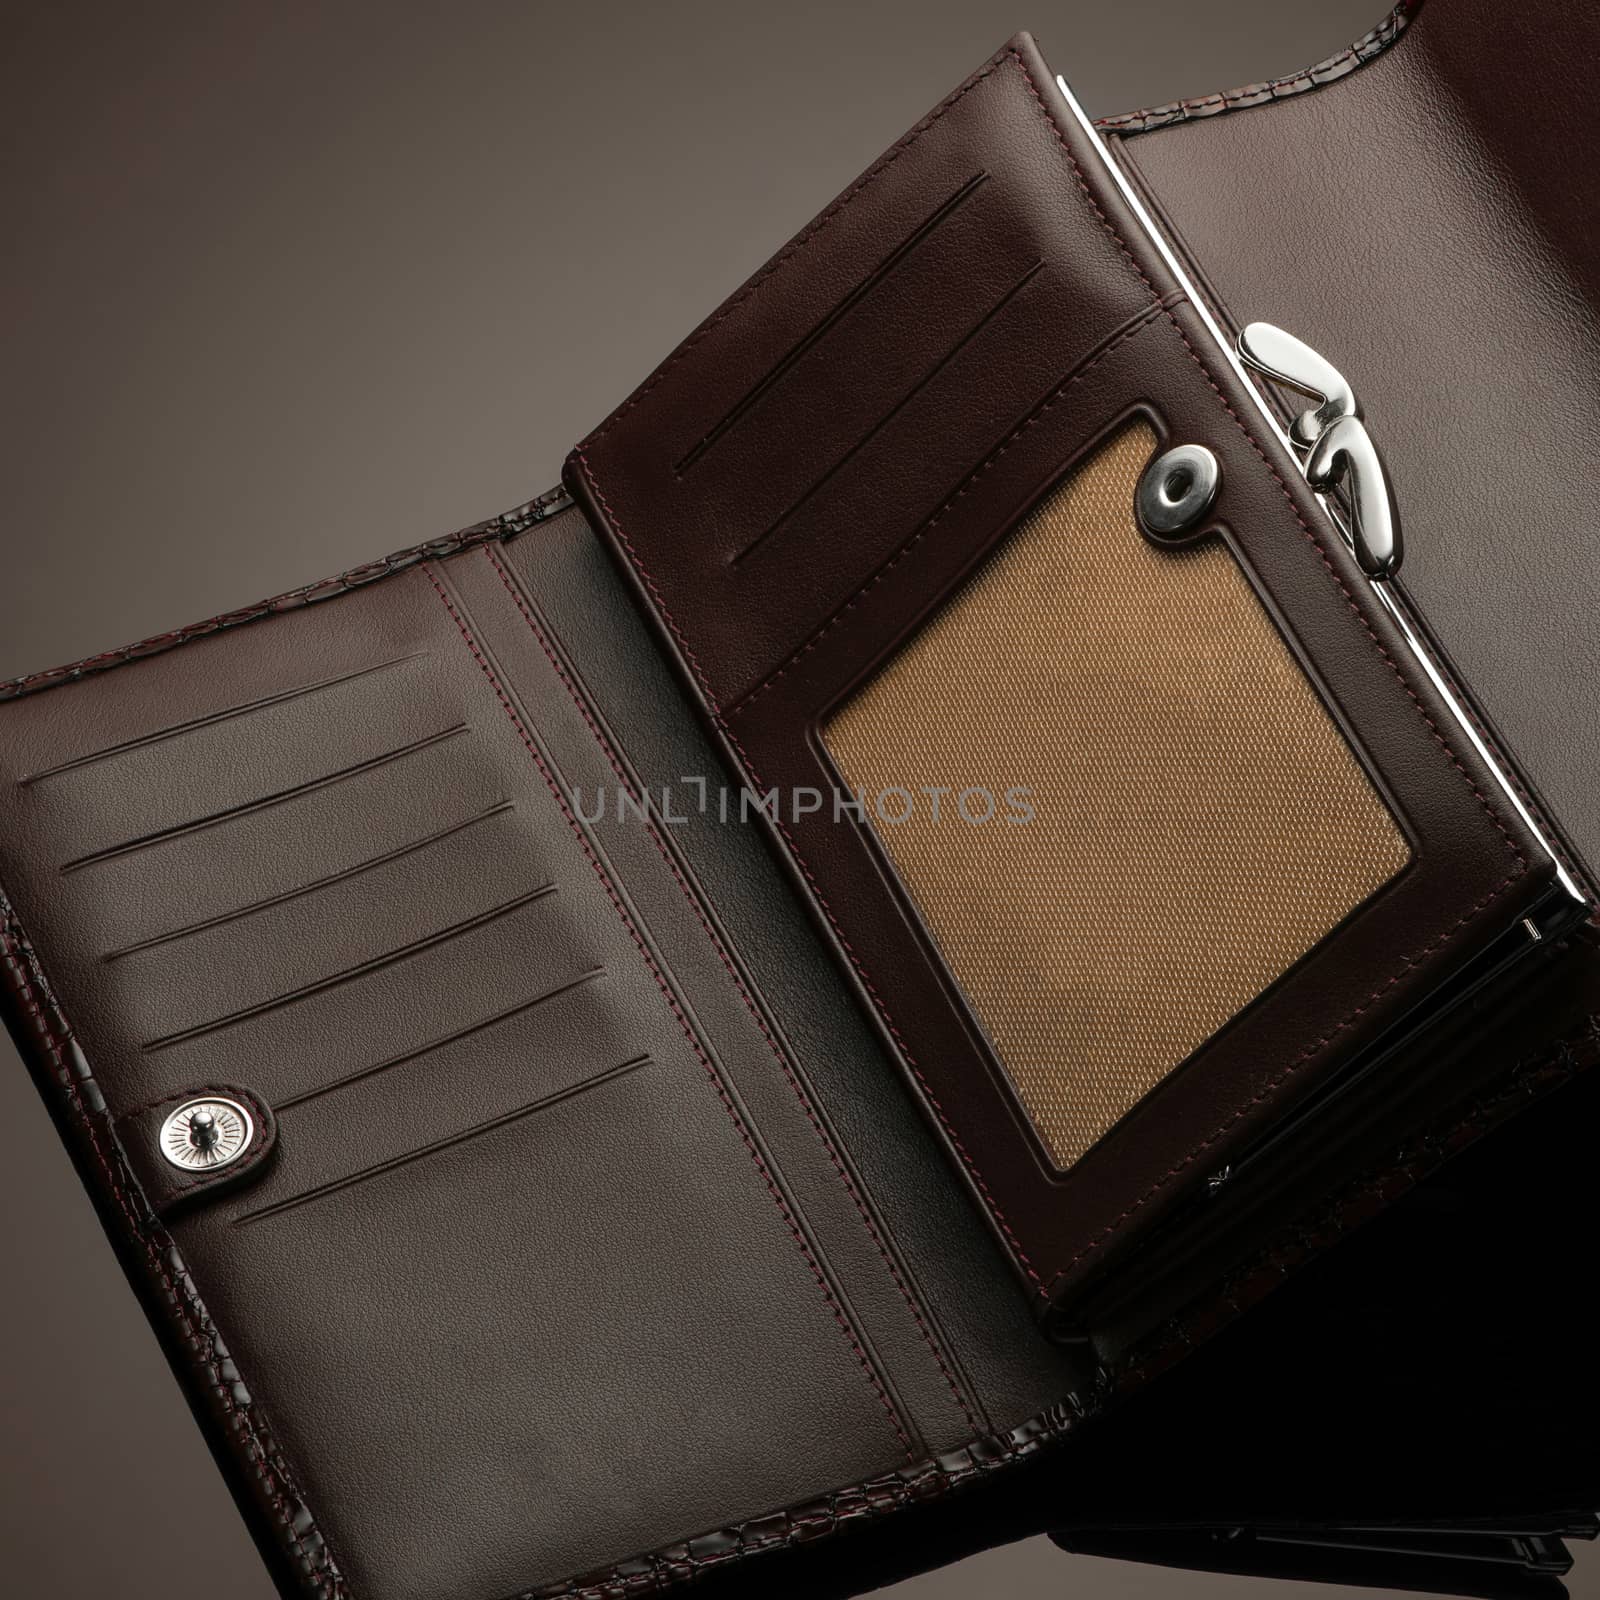 Fashionable leather men's wallet on a dark background